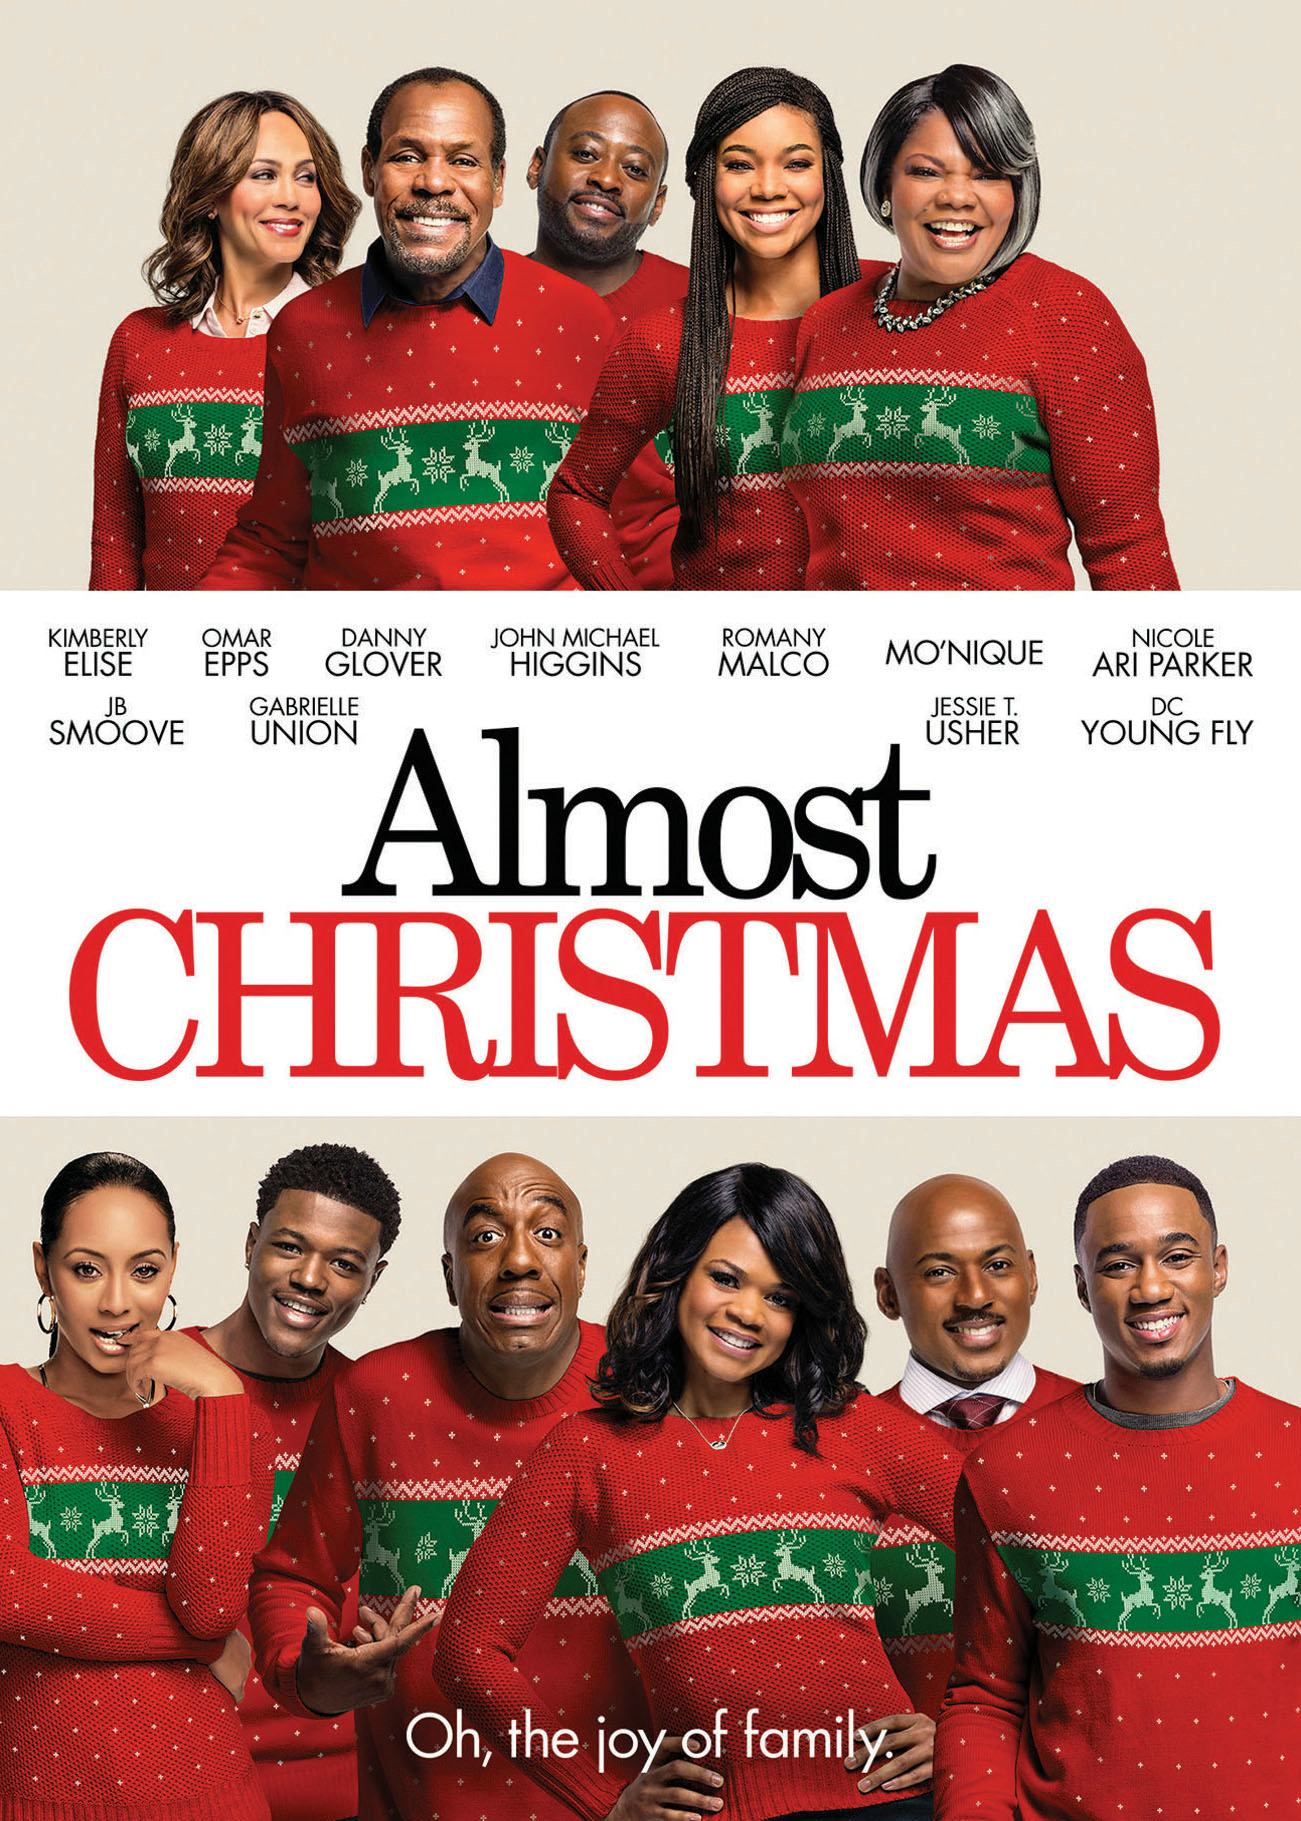 Almost Christmas - DVD [ 2016 ]  - Comedy Movies On DVD - Movies On GRUV